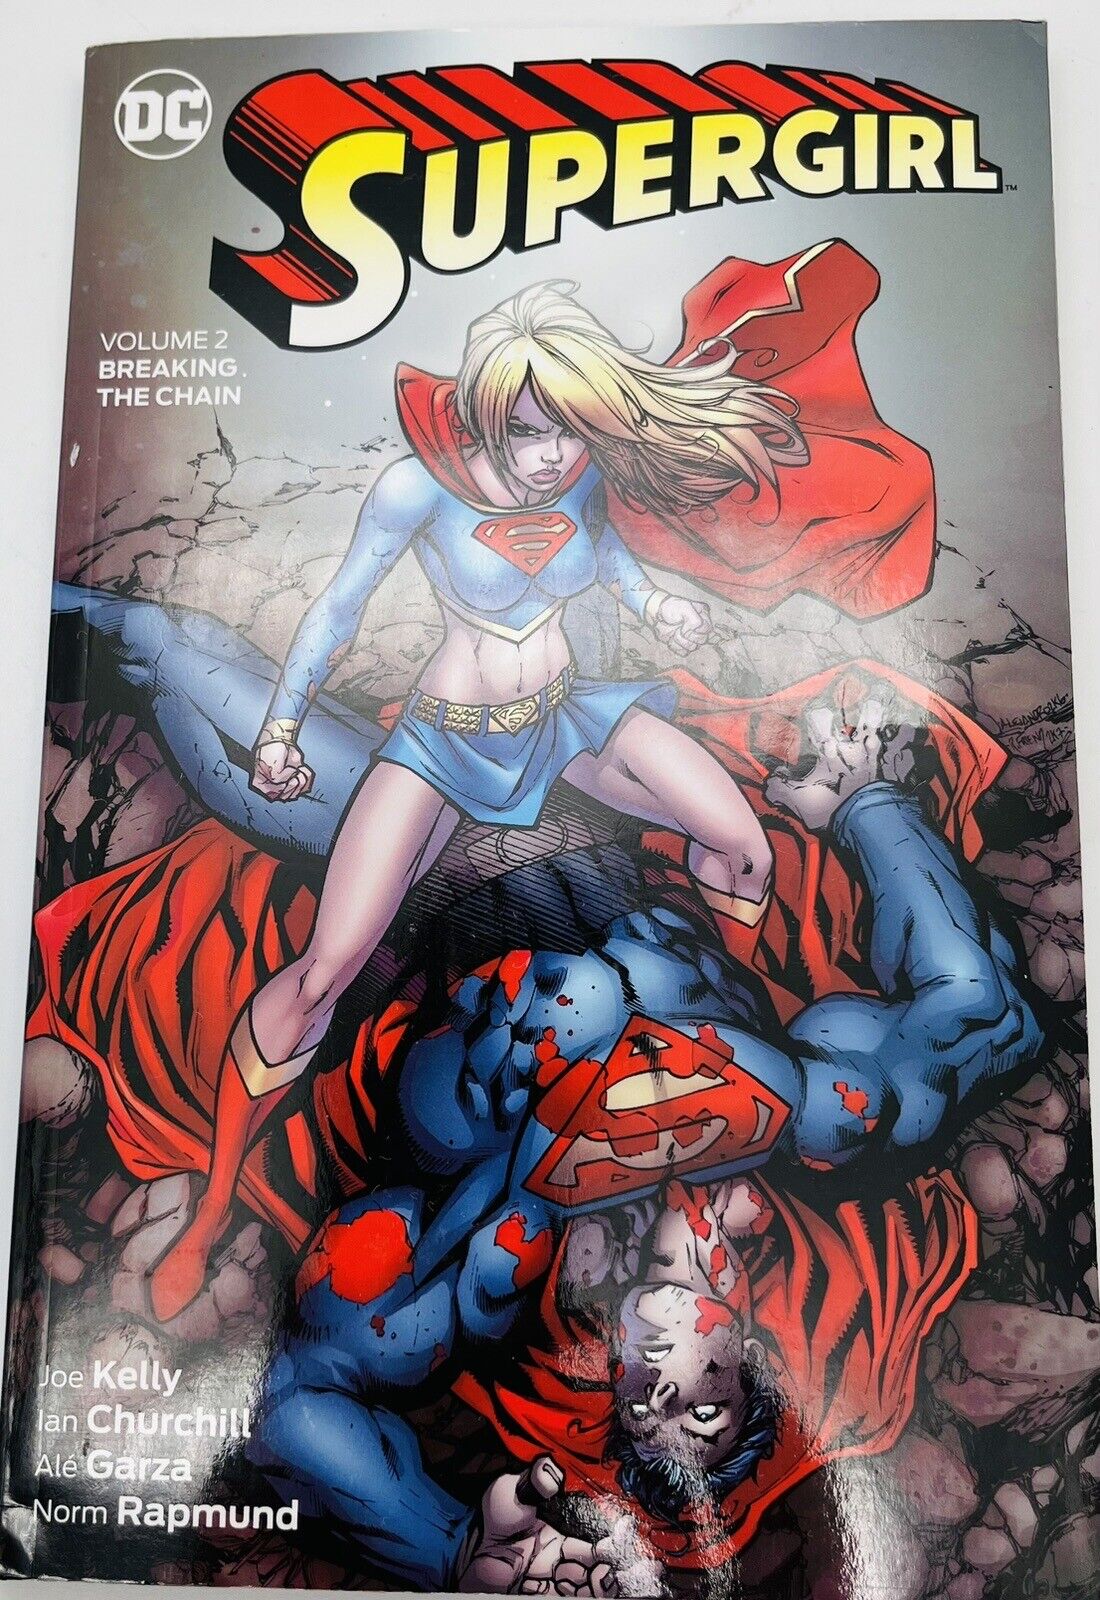 Supergirl Vol. 2 Breaking the Chain TPB Graphic Novel